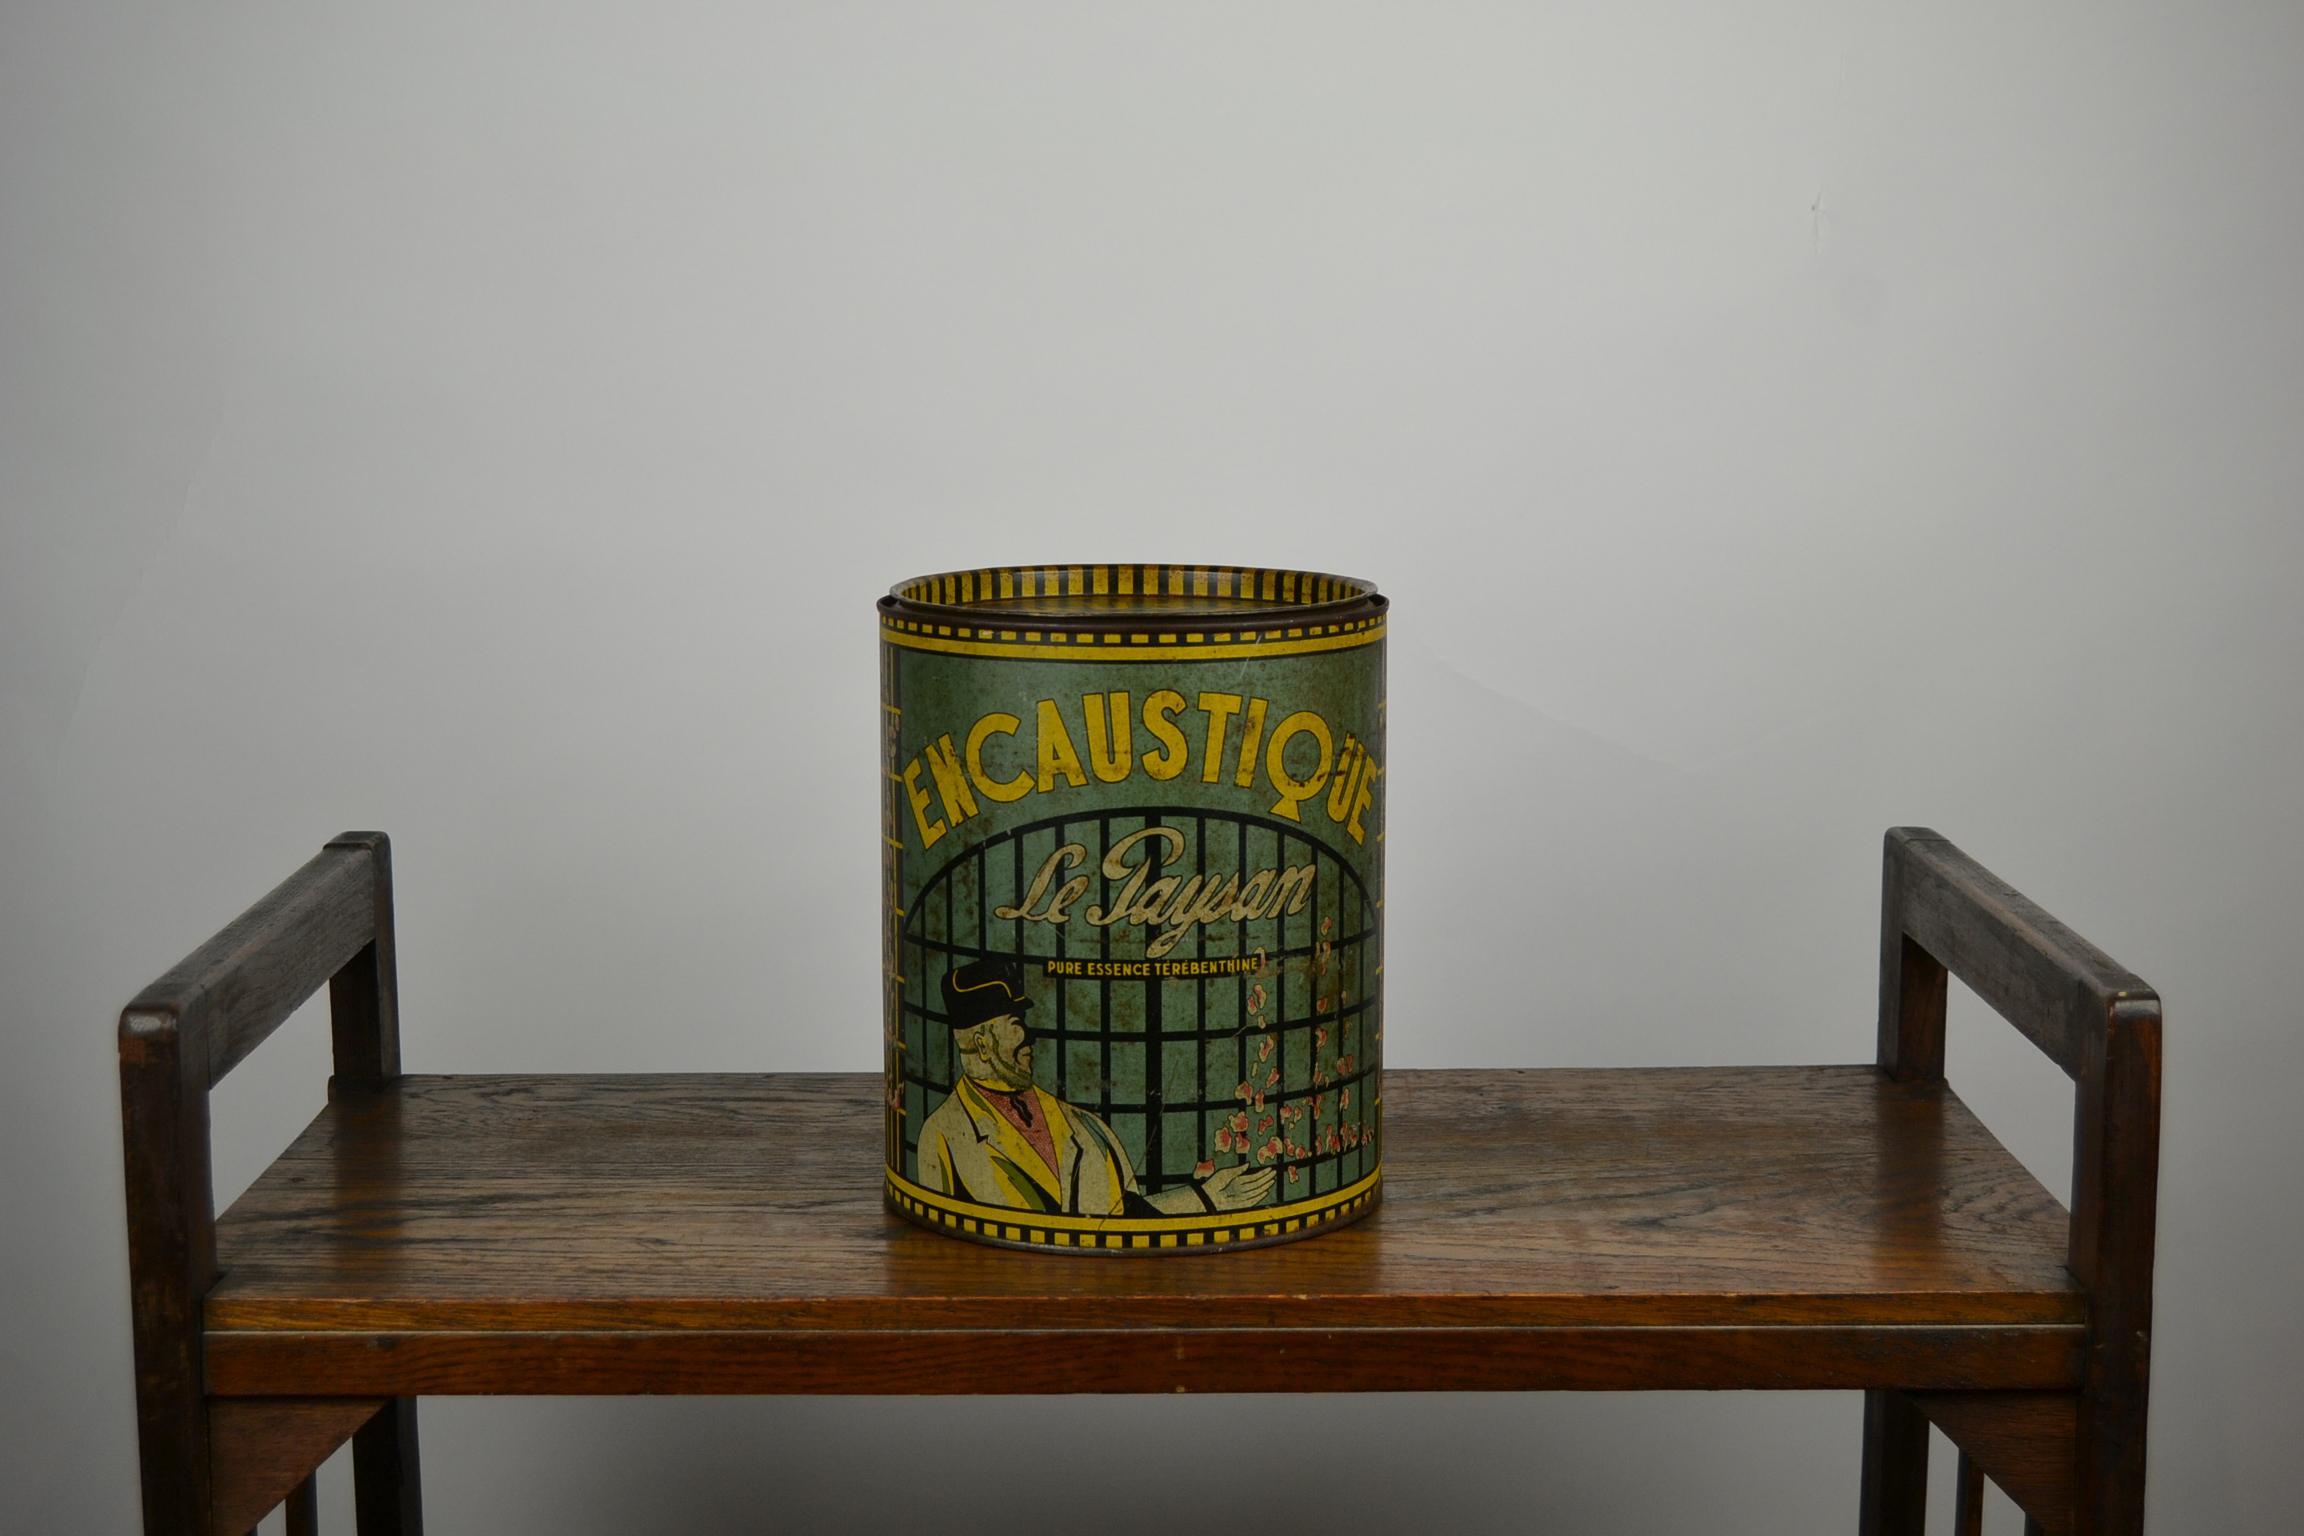 Art Deco tin box for Encaustique Le Paysan,
a French product for cleaning and restoring furniture, marbles, leather, parquet.
This round Tin has a beautiful lithographic design and lettering.
It was made by G. Dupain – Rouen, France between 1920